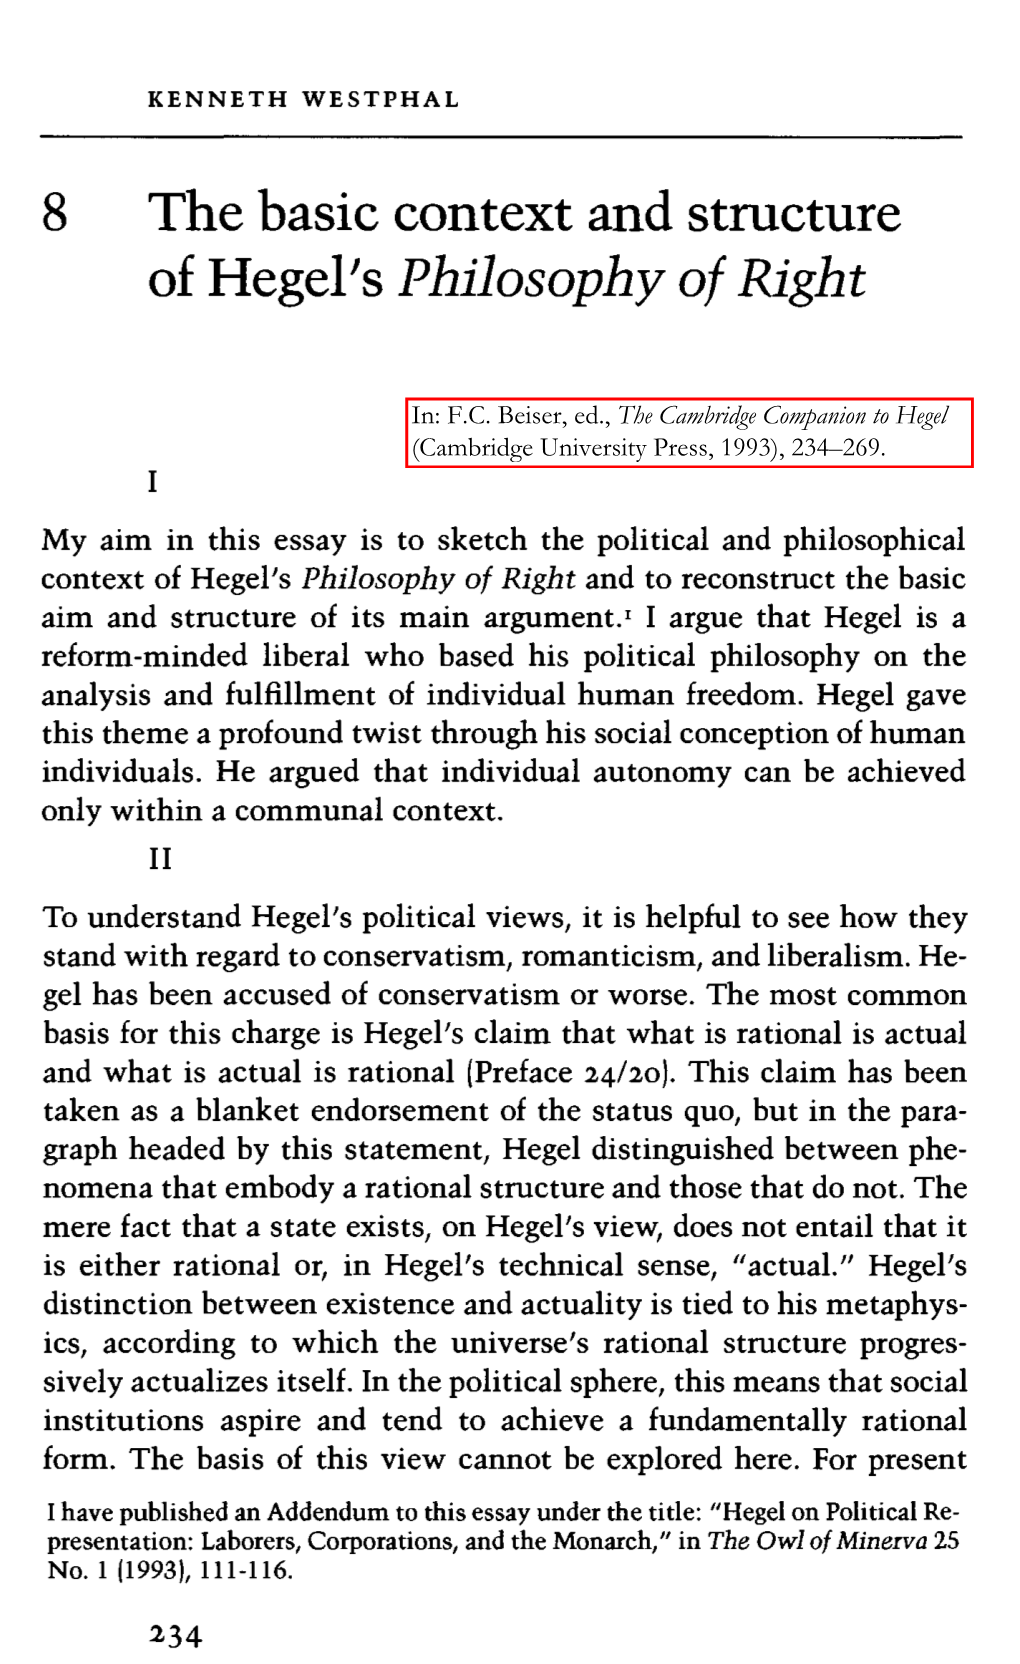 K. Westphal, 'The Basic Context and Structure of Hegel's Philosophy Of